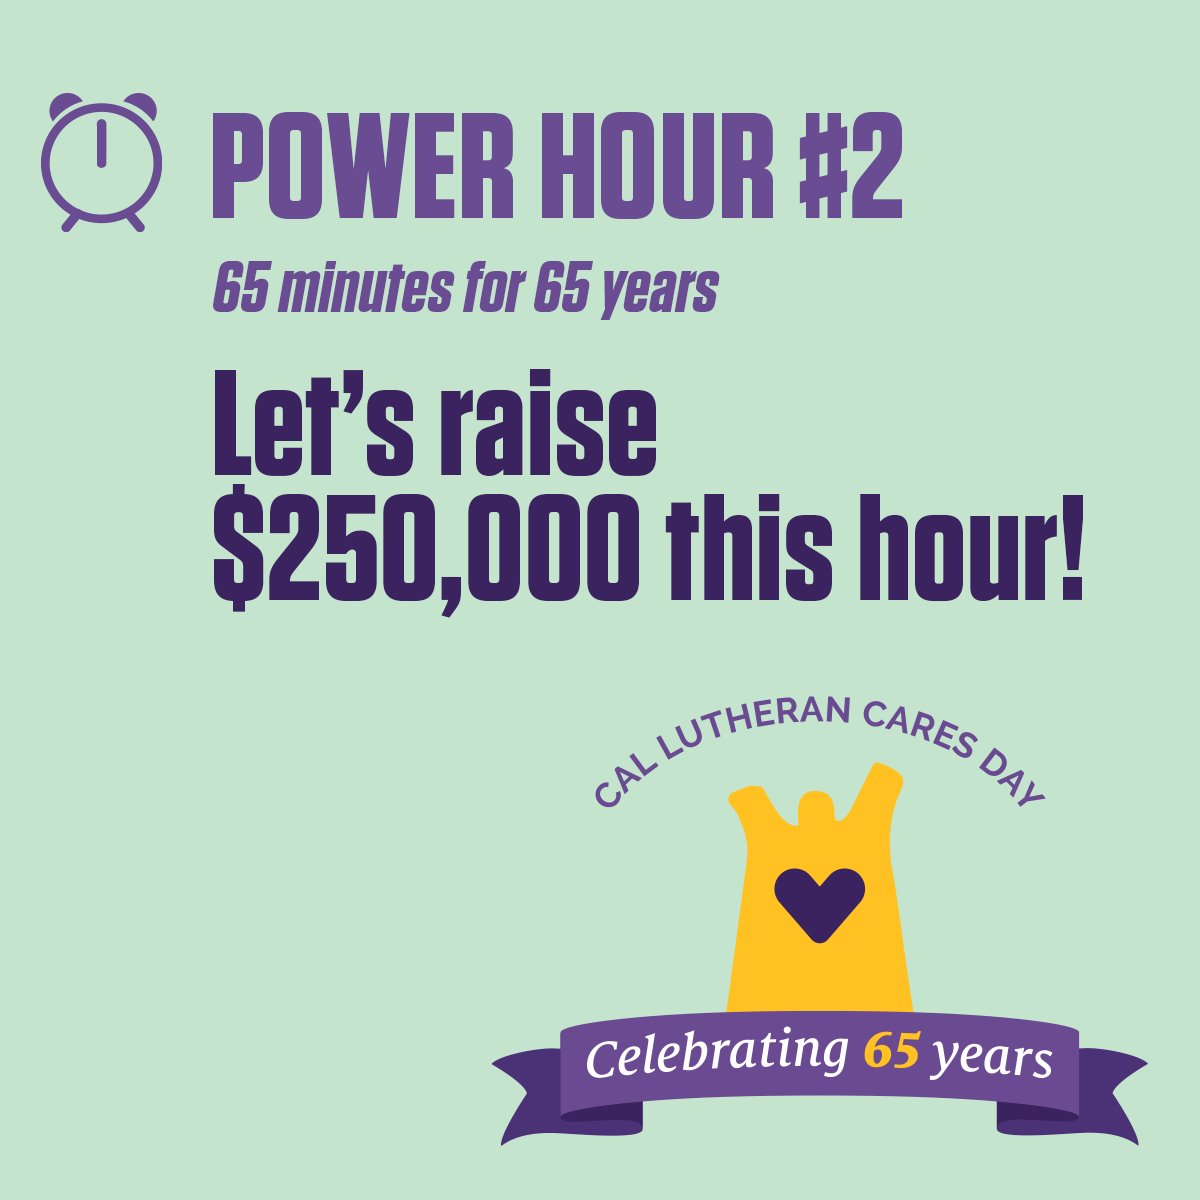 We’re aiming to raise $250,000 in the next 65 minutes to celebrate 65 years of Cal Lutheran and empower our students for 65 more! Help us reach the midday goal at caresday.CalLutheran.edu